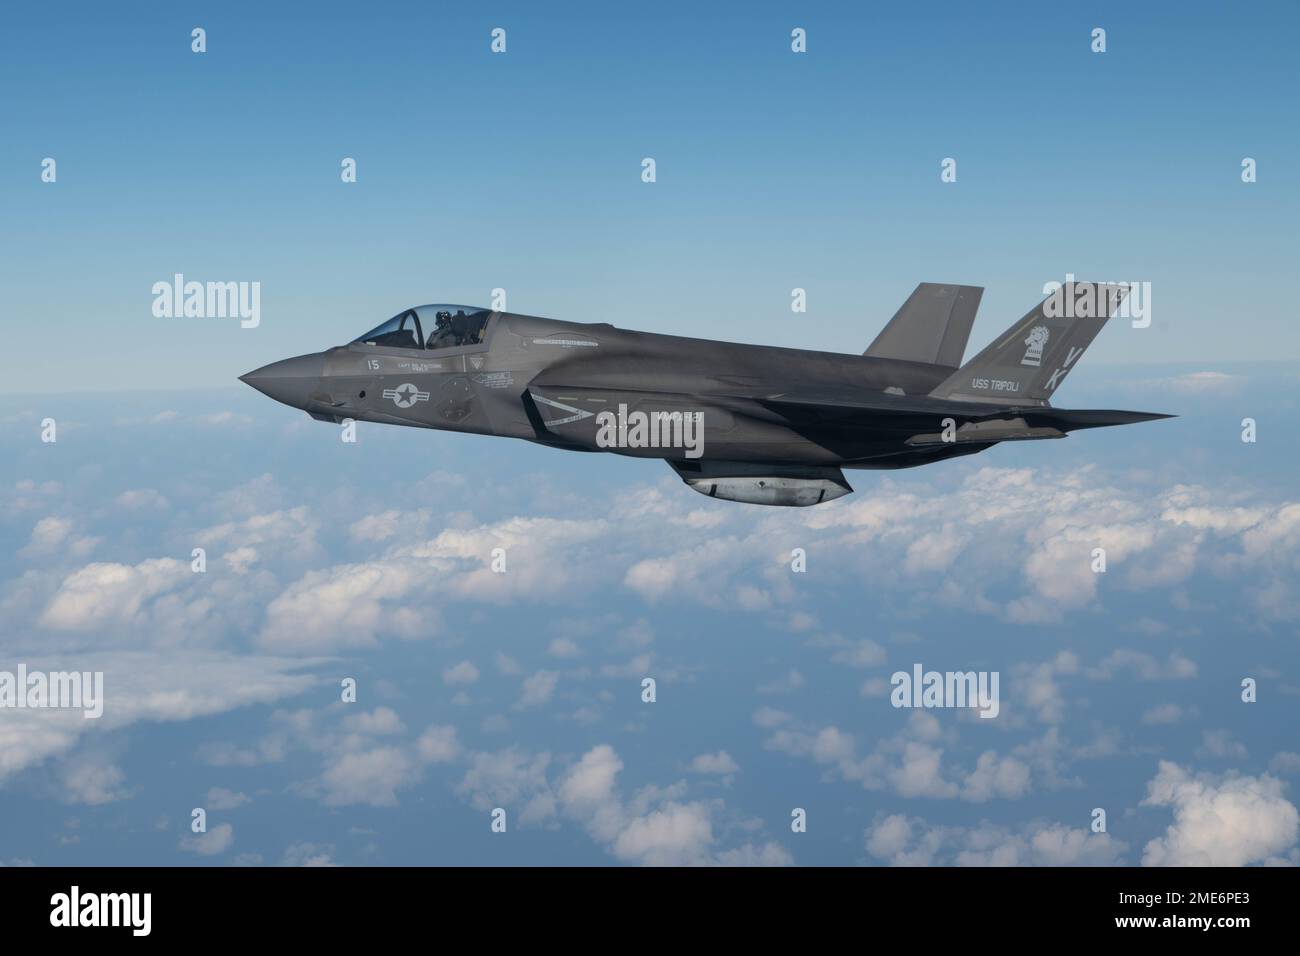 Pacific Ocean, United States. 19 January, 2023. A U.S. Marine Corps F-35B Lightning II stealth fighter aircraft with the Green Knights of Marine Fighter Attack Squadron 121, approaches an Air Force KC-135 Stratotanker to refuel during routine operations, January 19, 2023 over the Pacific Ocean.  Credit: A1C Tylir Meyer/U.S. Air Force/Alamy Live News Stock Photo